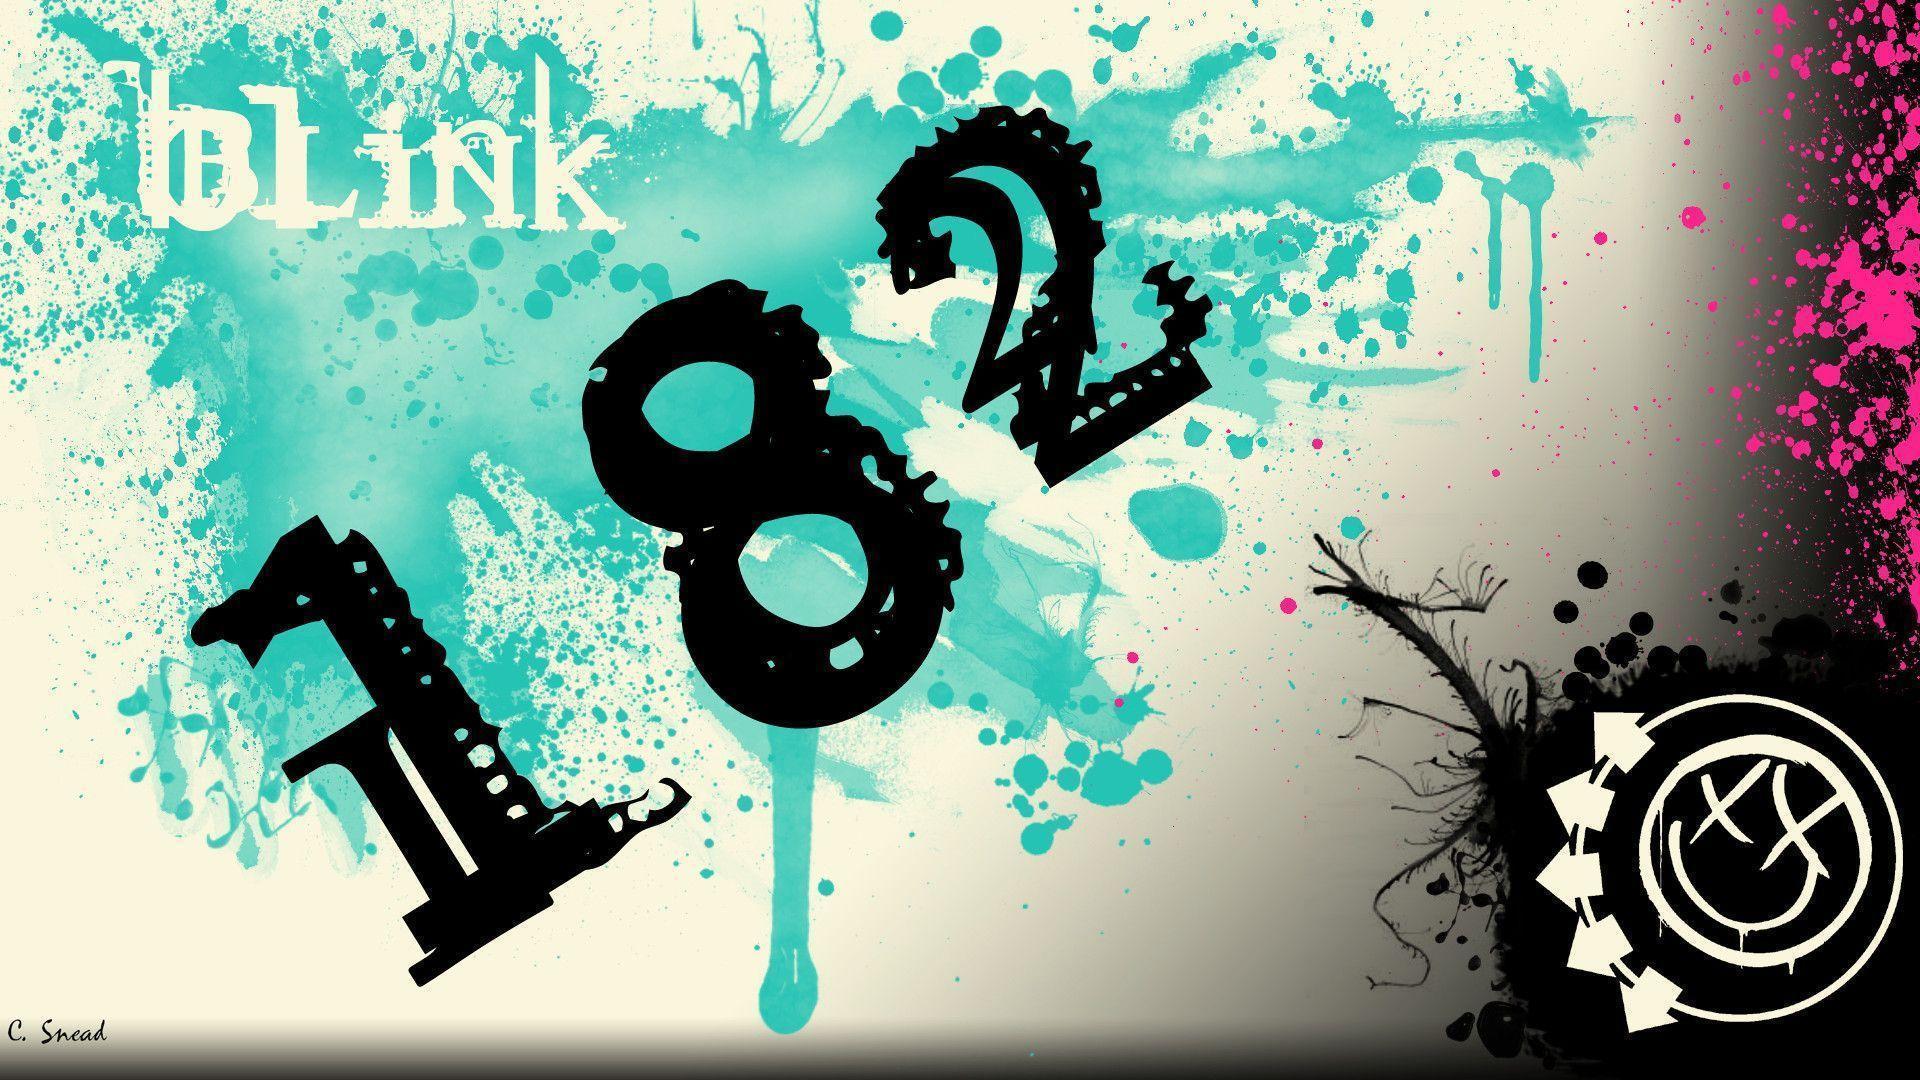 Blink 182 Wallpapers Abstract Graffiti wallpapers #